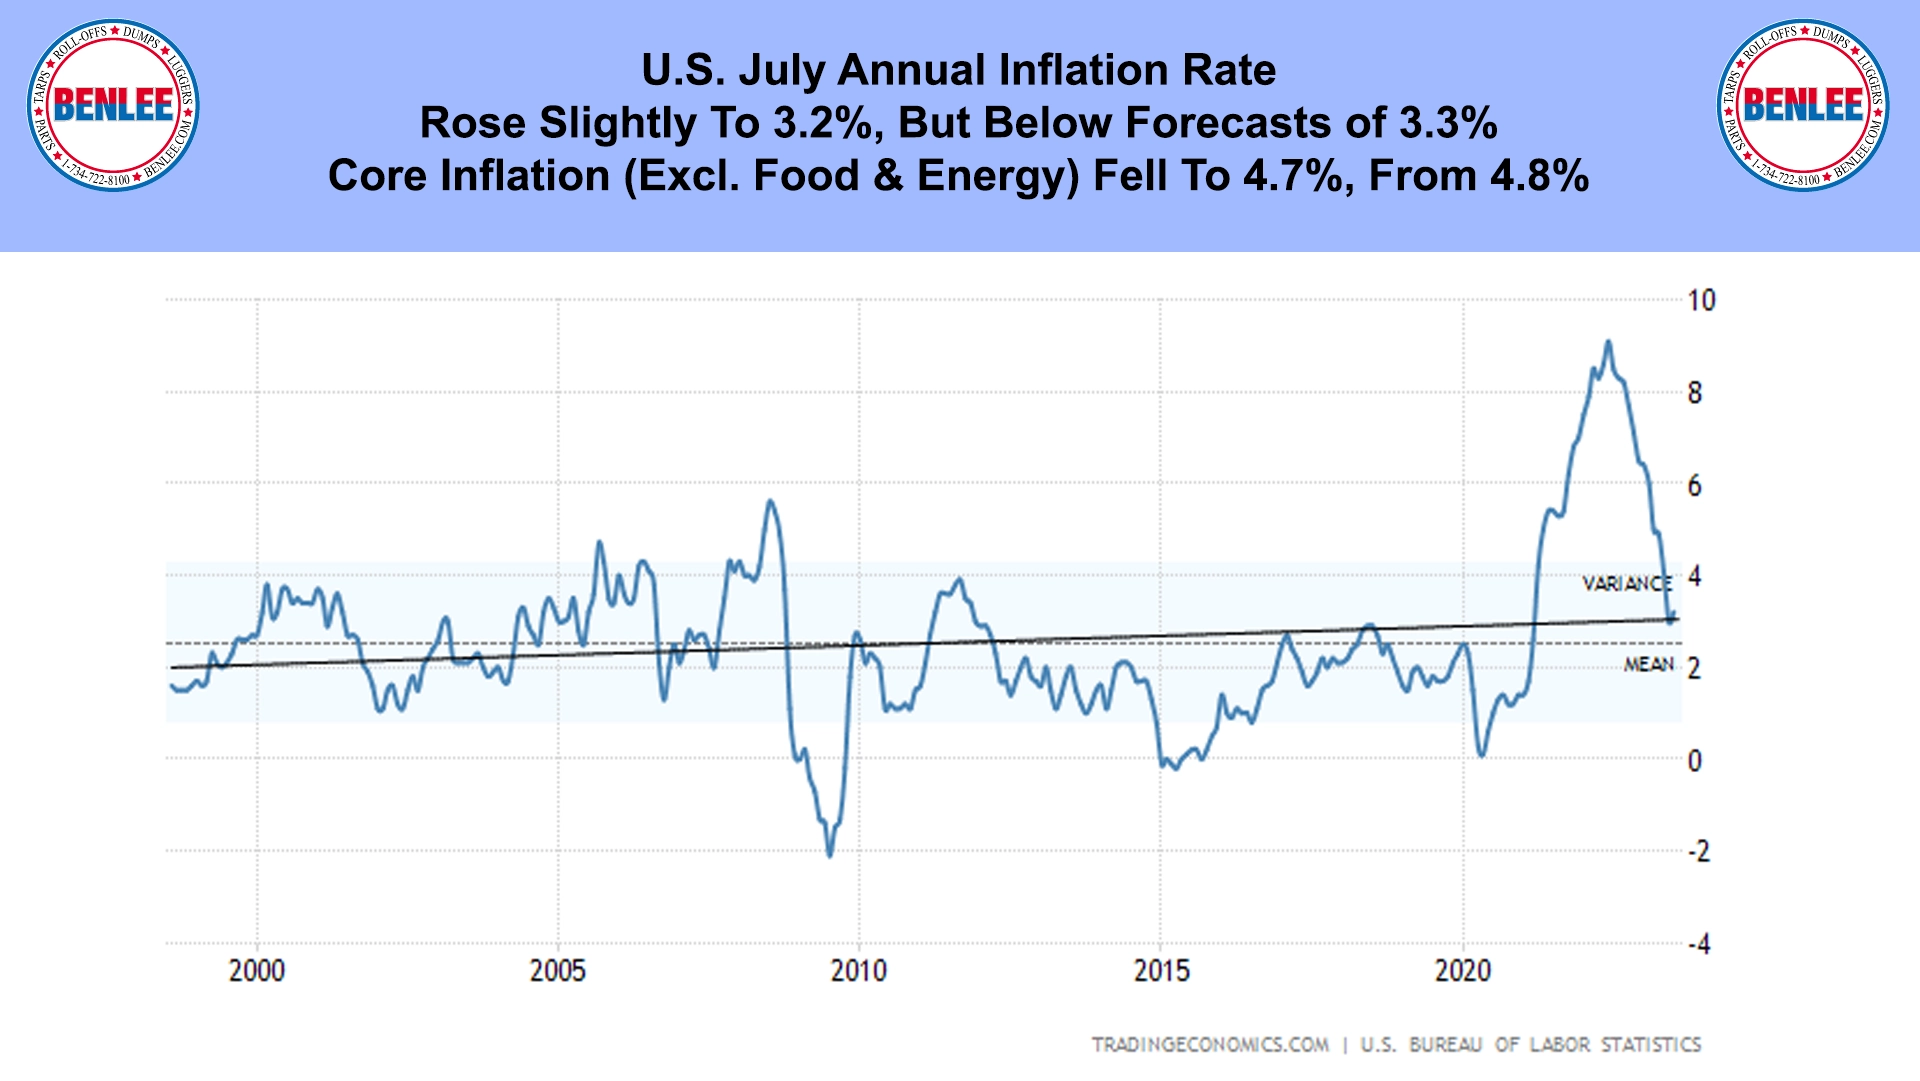 U.S. July Annual Inflation Rate